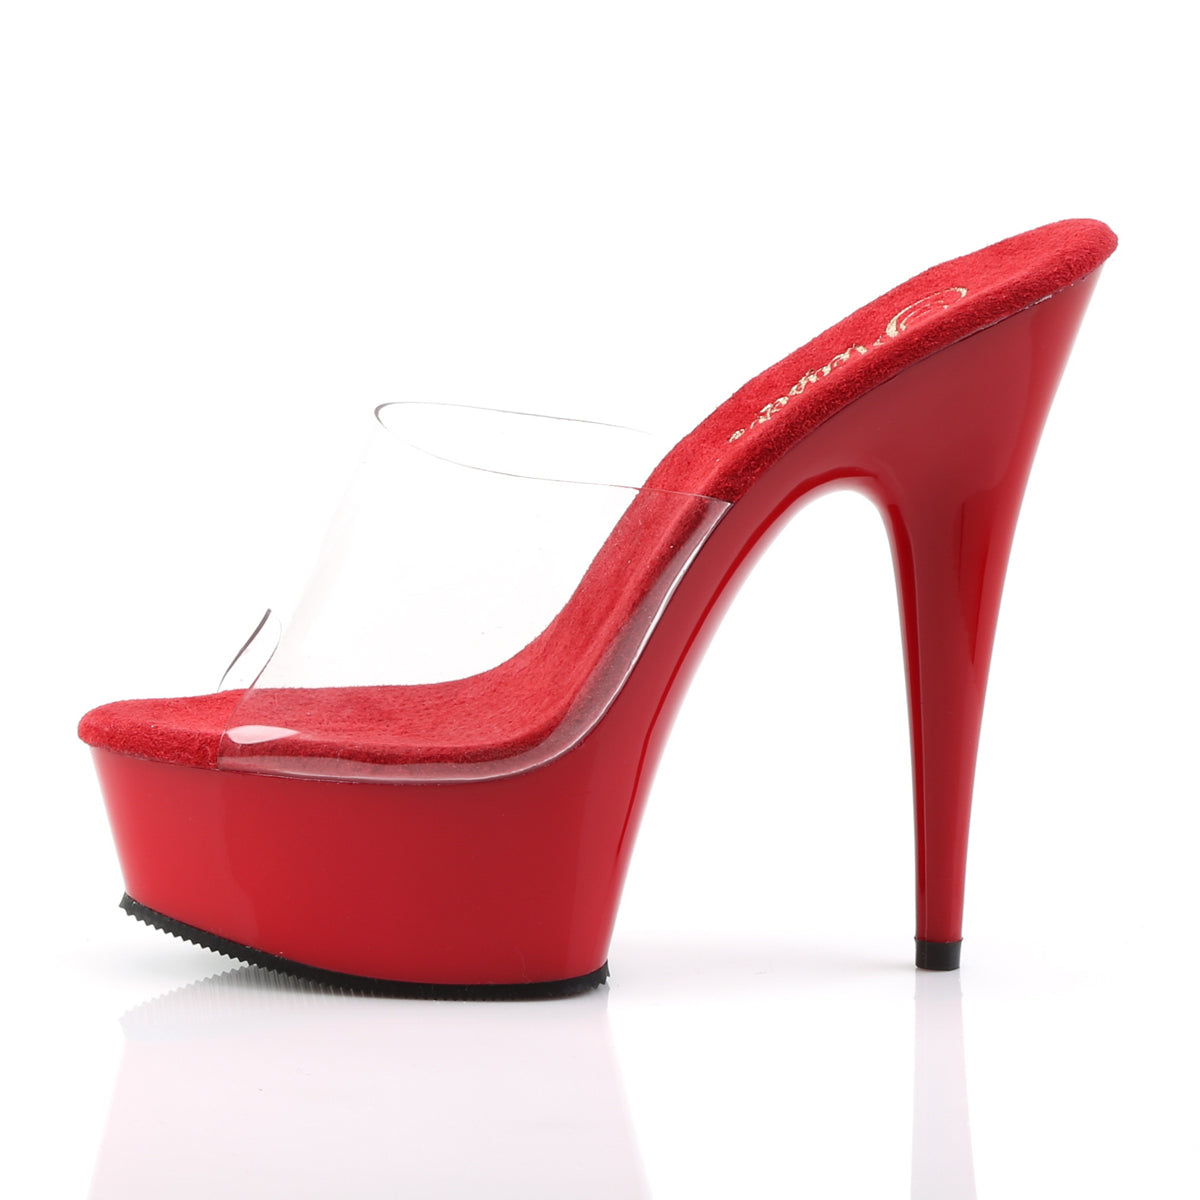 PLEASER DELIGHT-601 RED CLEAR 6 INCH HIGH HEEL PLATFORM SHOES SIZE 8